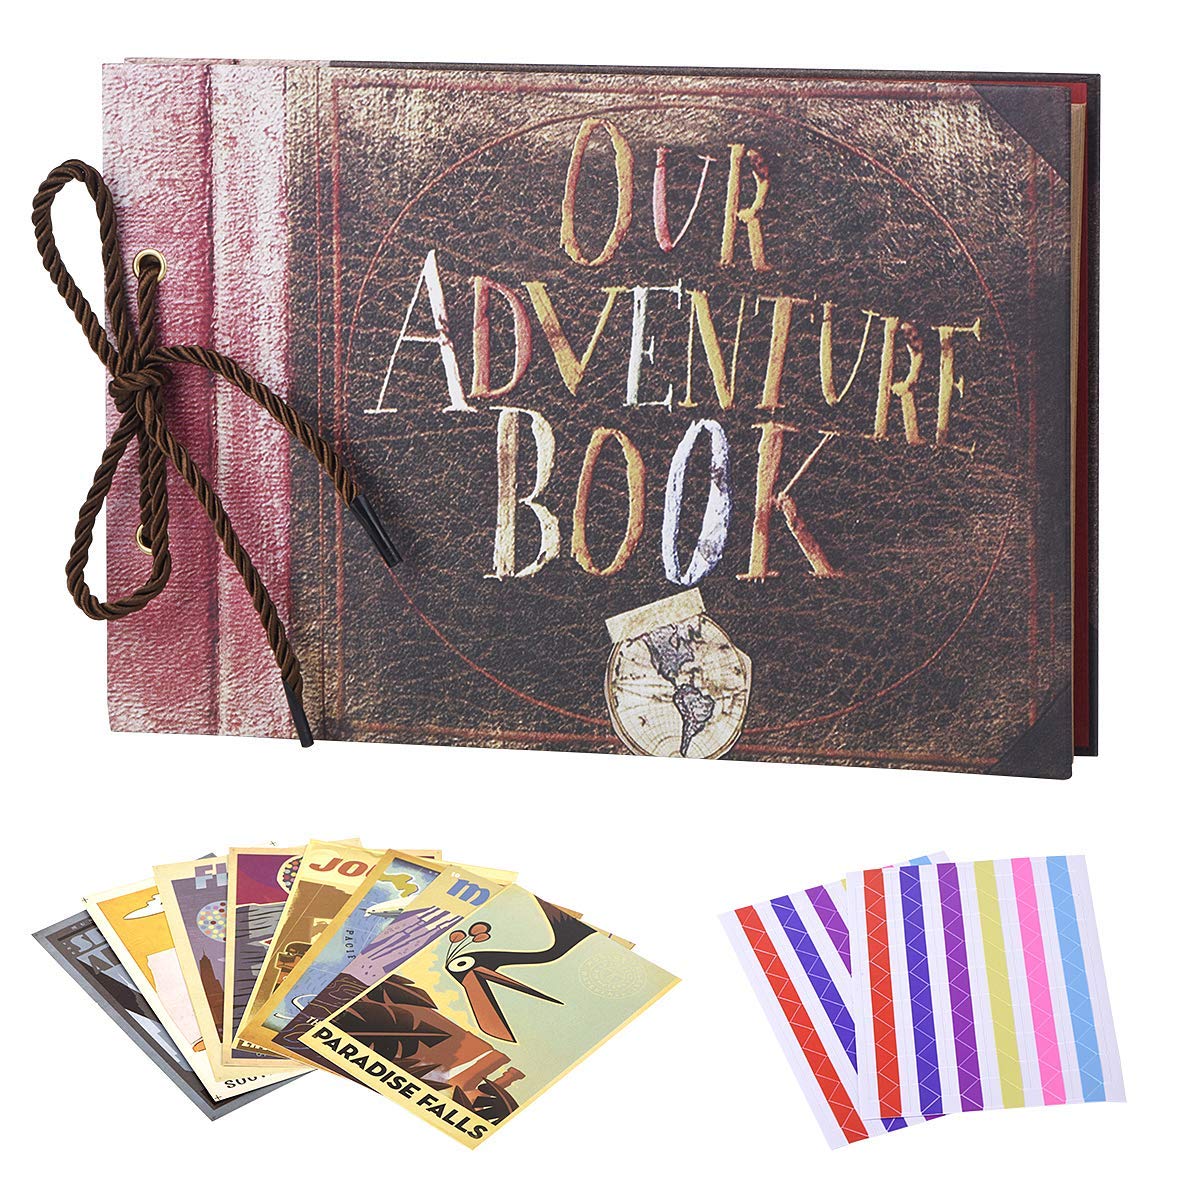 LINKEDWIN Our Adventure Book, Pixar Up Themed Scrapbook with Movie Postcards, Wedding and Anniversary Photo Album, Memory Keepsake, 11.6 x 7.5 inch